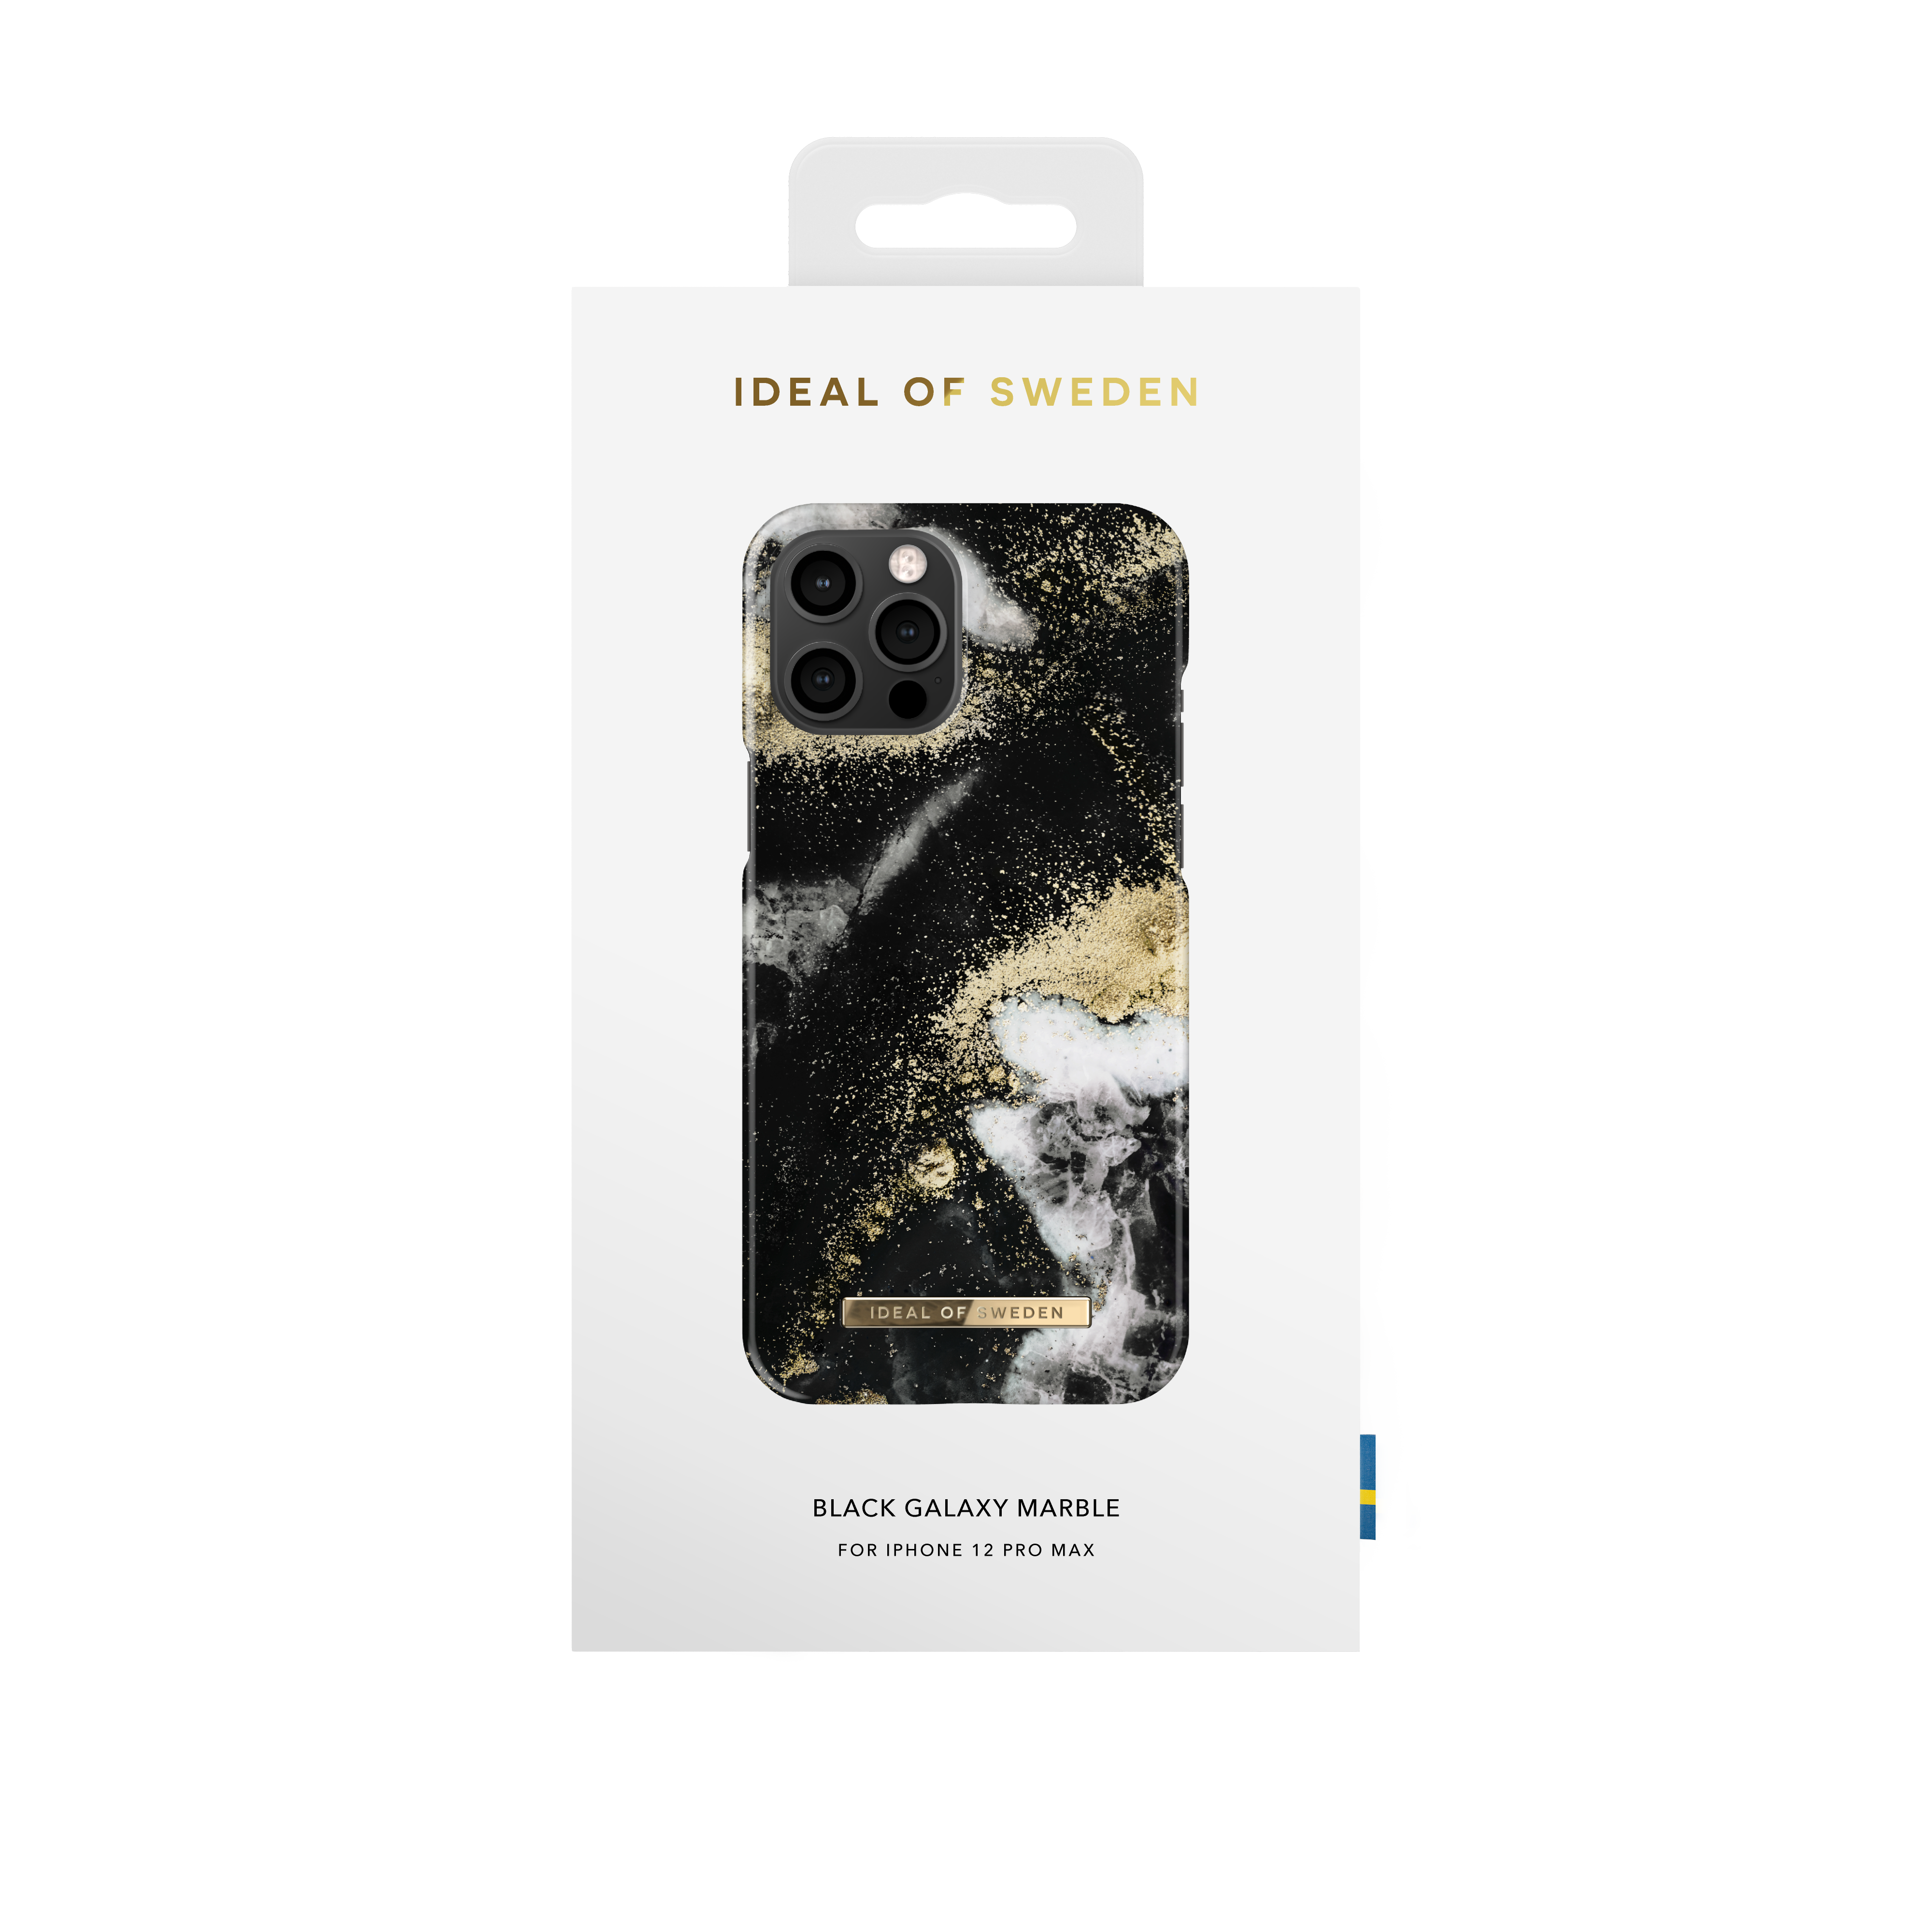 SWEDEN Marble Backcover, IPhone Max, OF IDFCAW19-I2067-150, Pro Black Galaxy 12 IDEAL Apple,